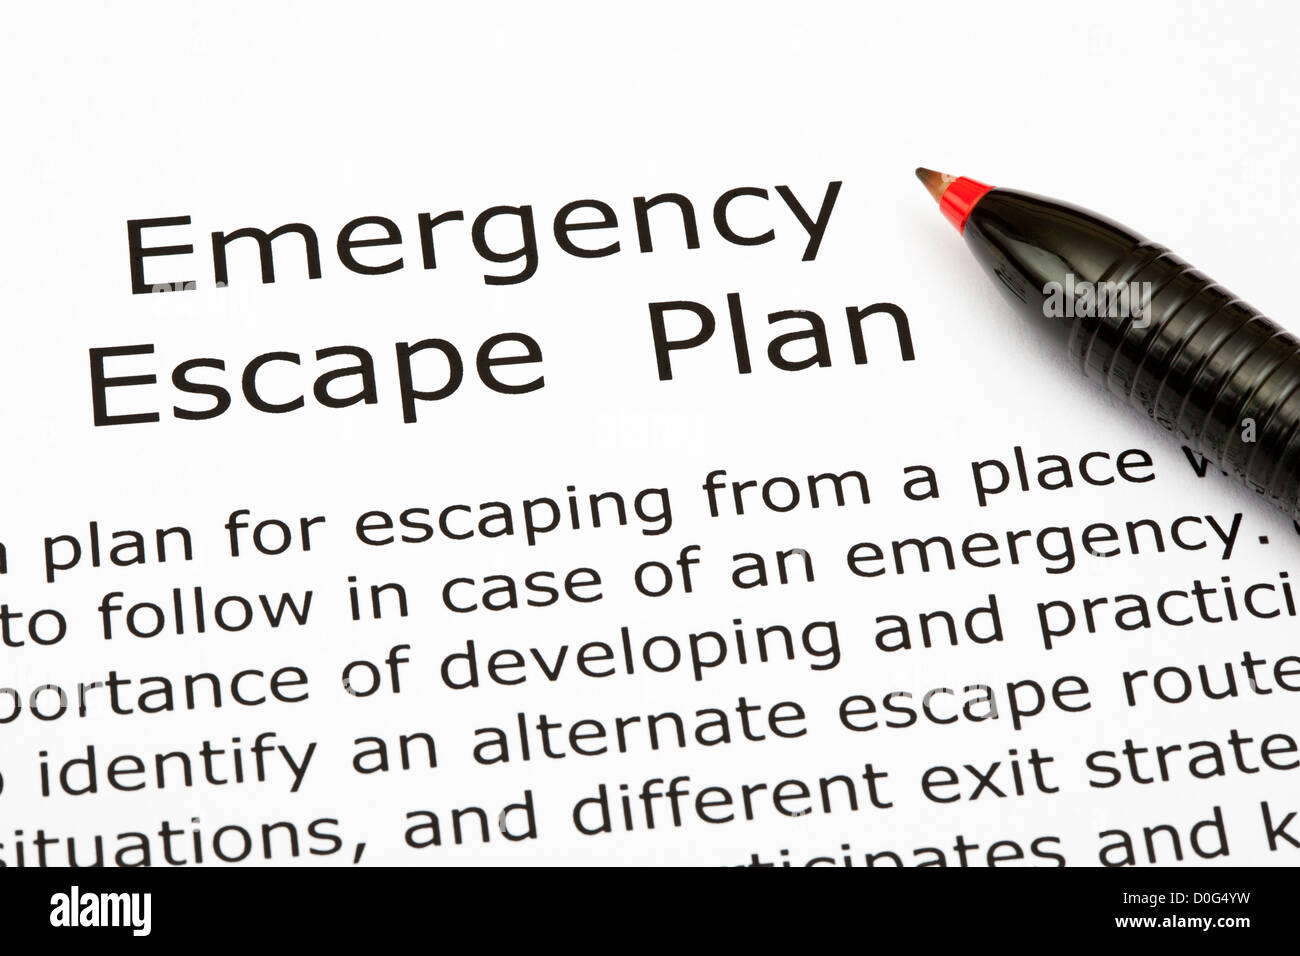 Emergency Escape Plan with red pen Stock Photo